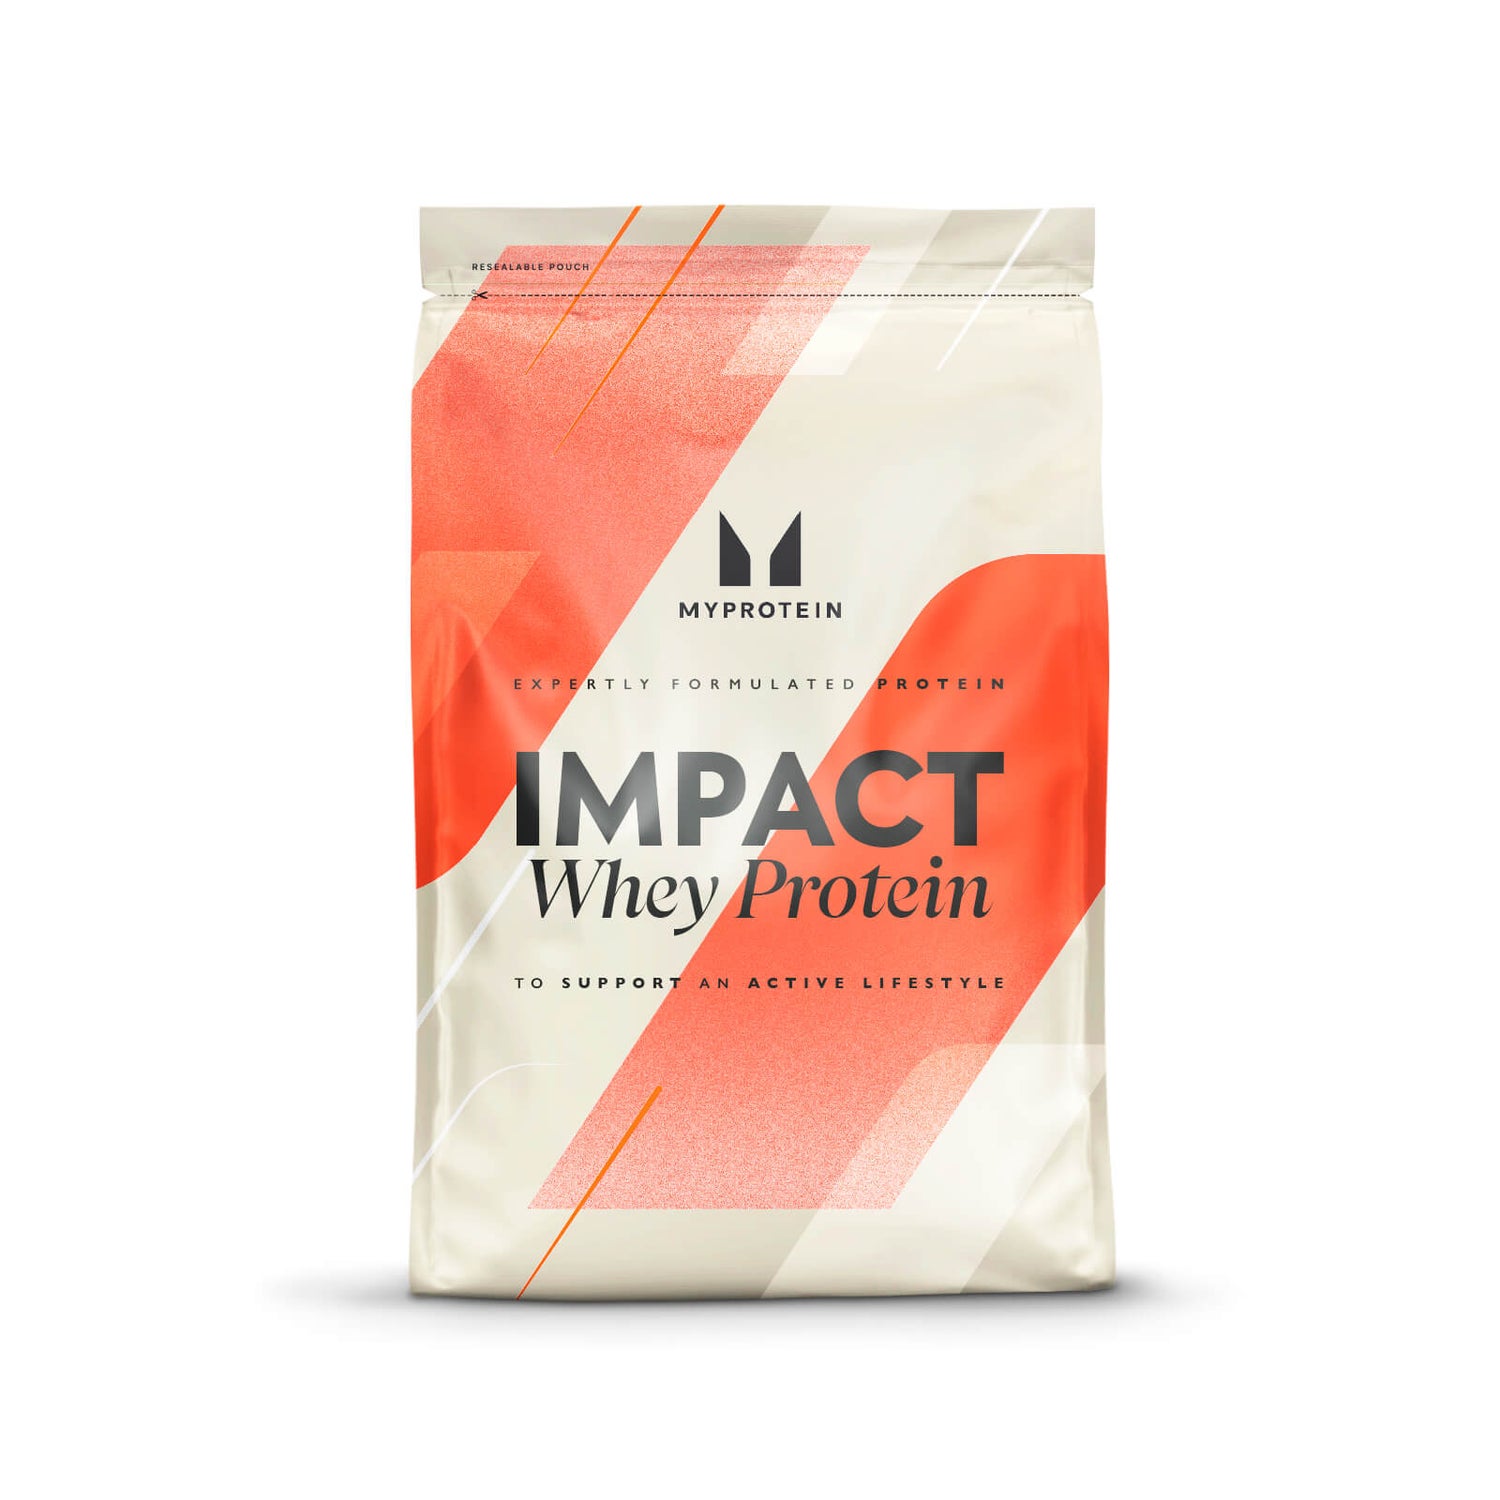 Impact Whey Protein Powder - 1kg - Cookies and Cream